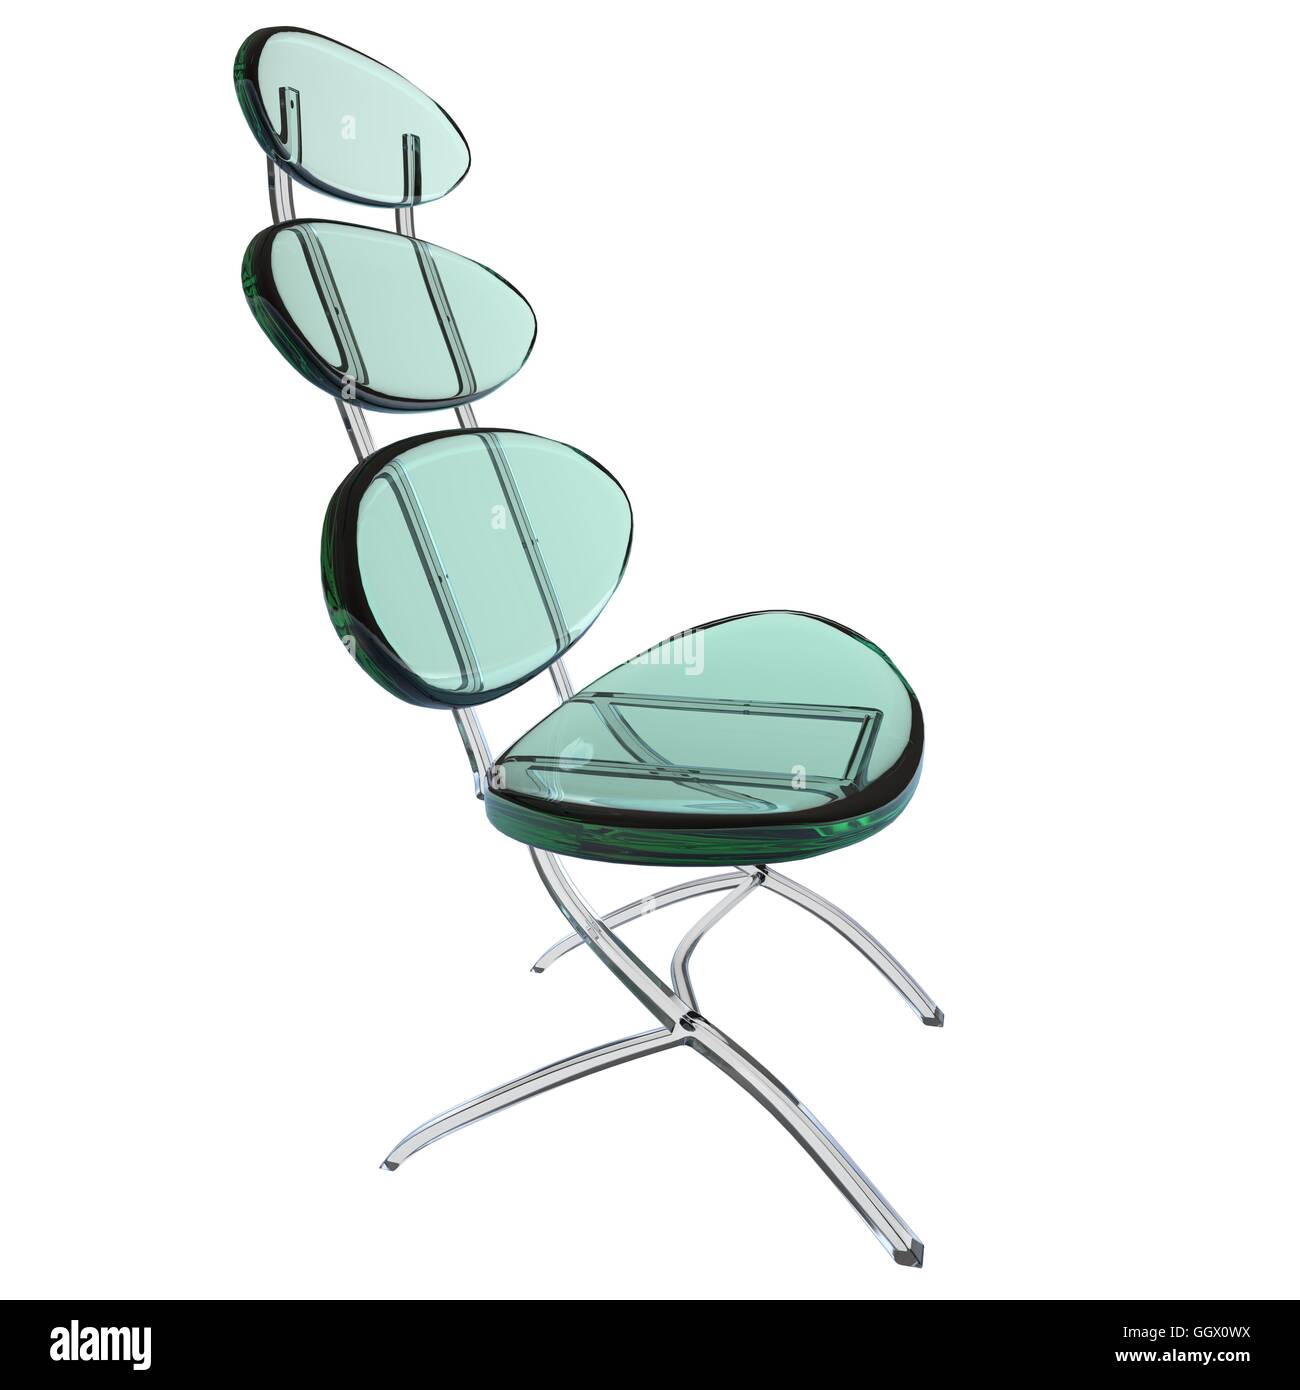 https://c8.alamy.com/comp/GGX0WX/modern-chair-with-three-pieces-on-its-back-GGX0WX.jpg